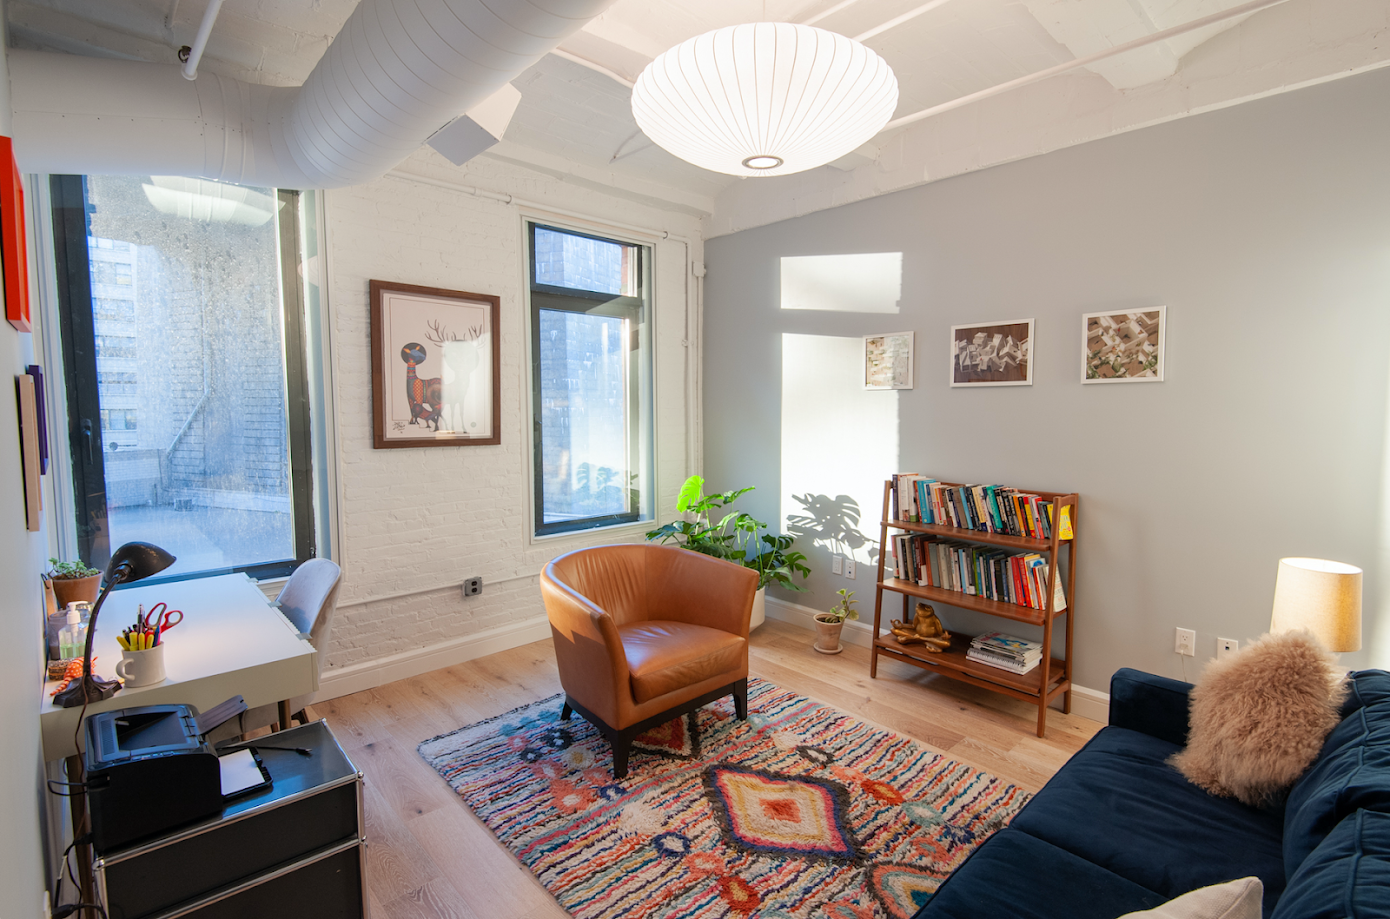 Tête Dumbo Center for Psychotherapy - NYC Therapists, Psychologists & Counselors